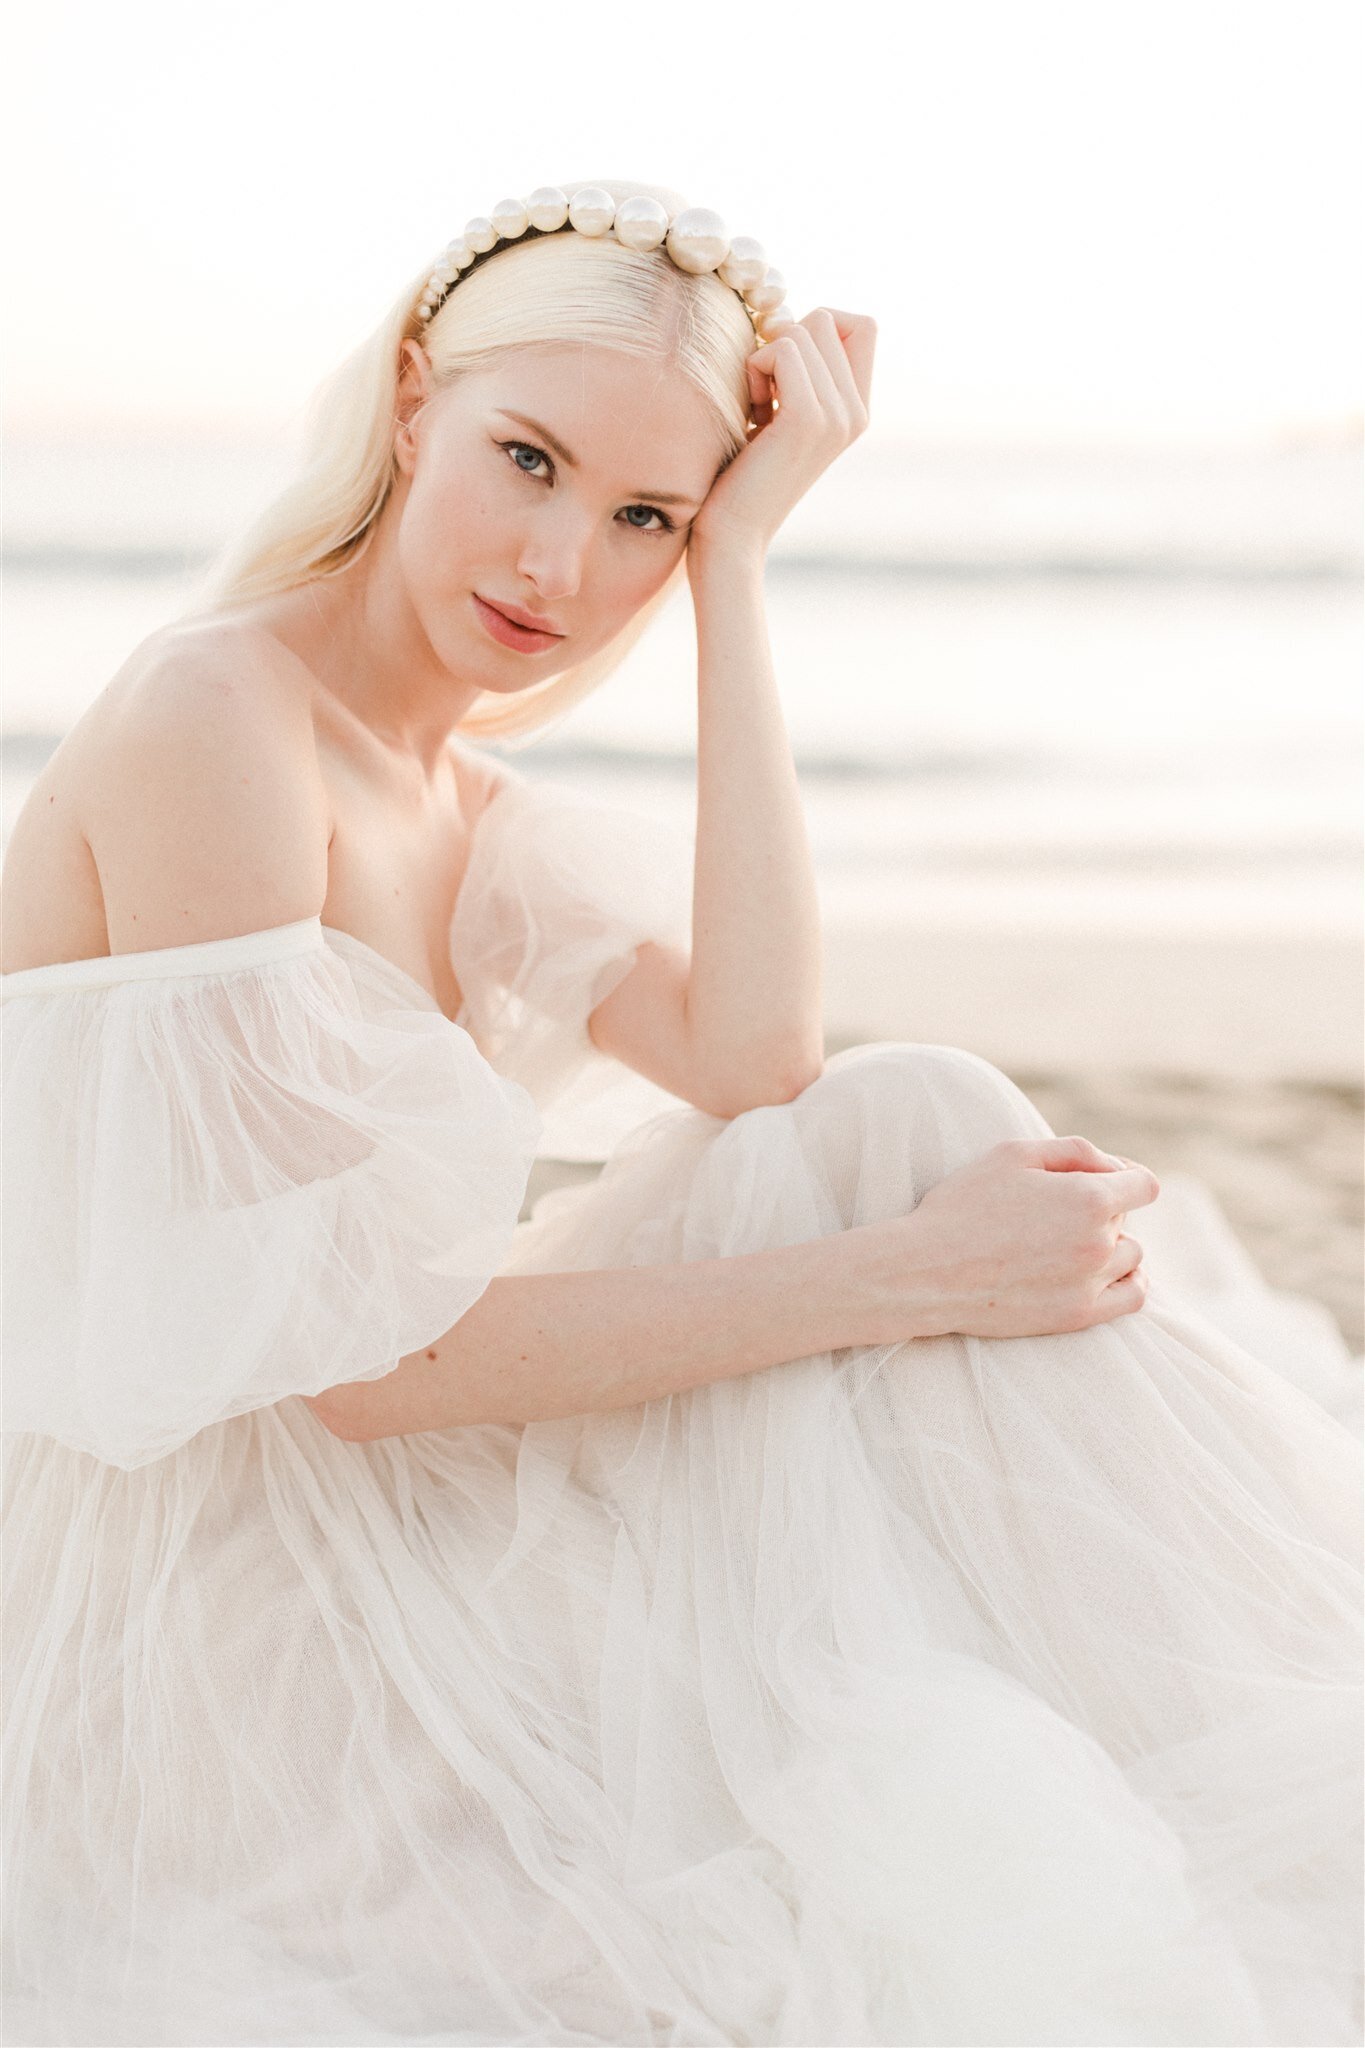 Watters Wedaways Thompson Zihuatanejo-Valorie Darling Photography-DF1A1154